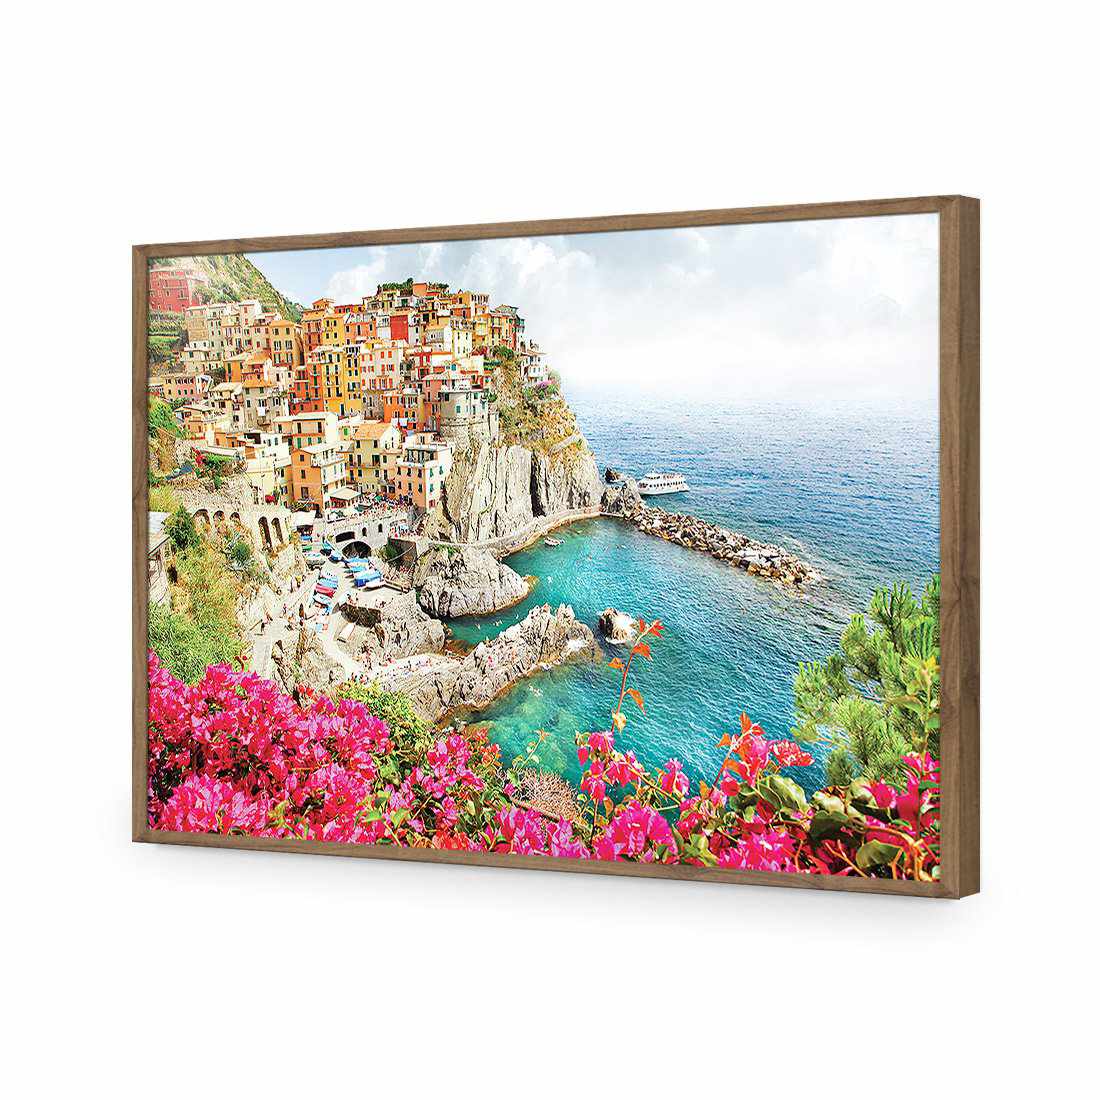 Cinque Terre in Italy-Acrylic-Wall Art Design-Without Border-Acrylic - Natural Frame-45x30cm-Wall Art Designs